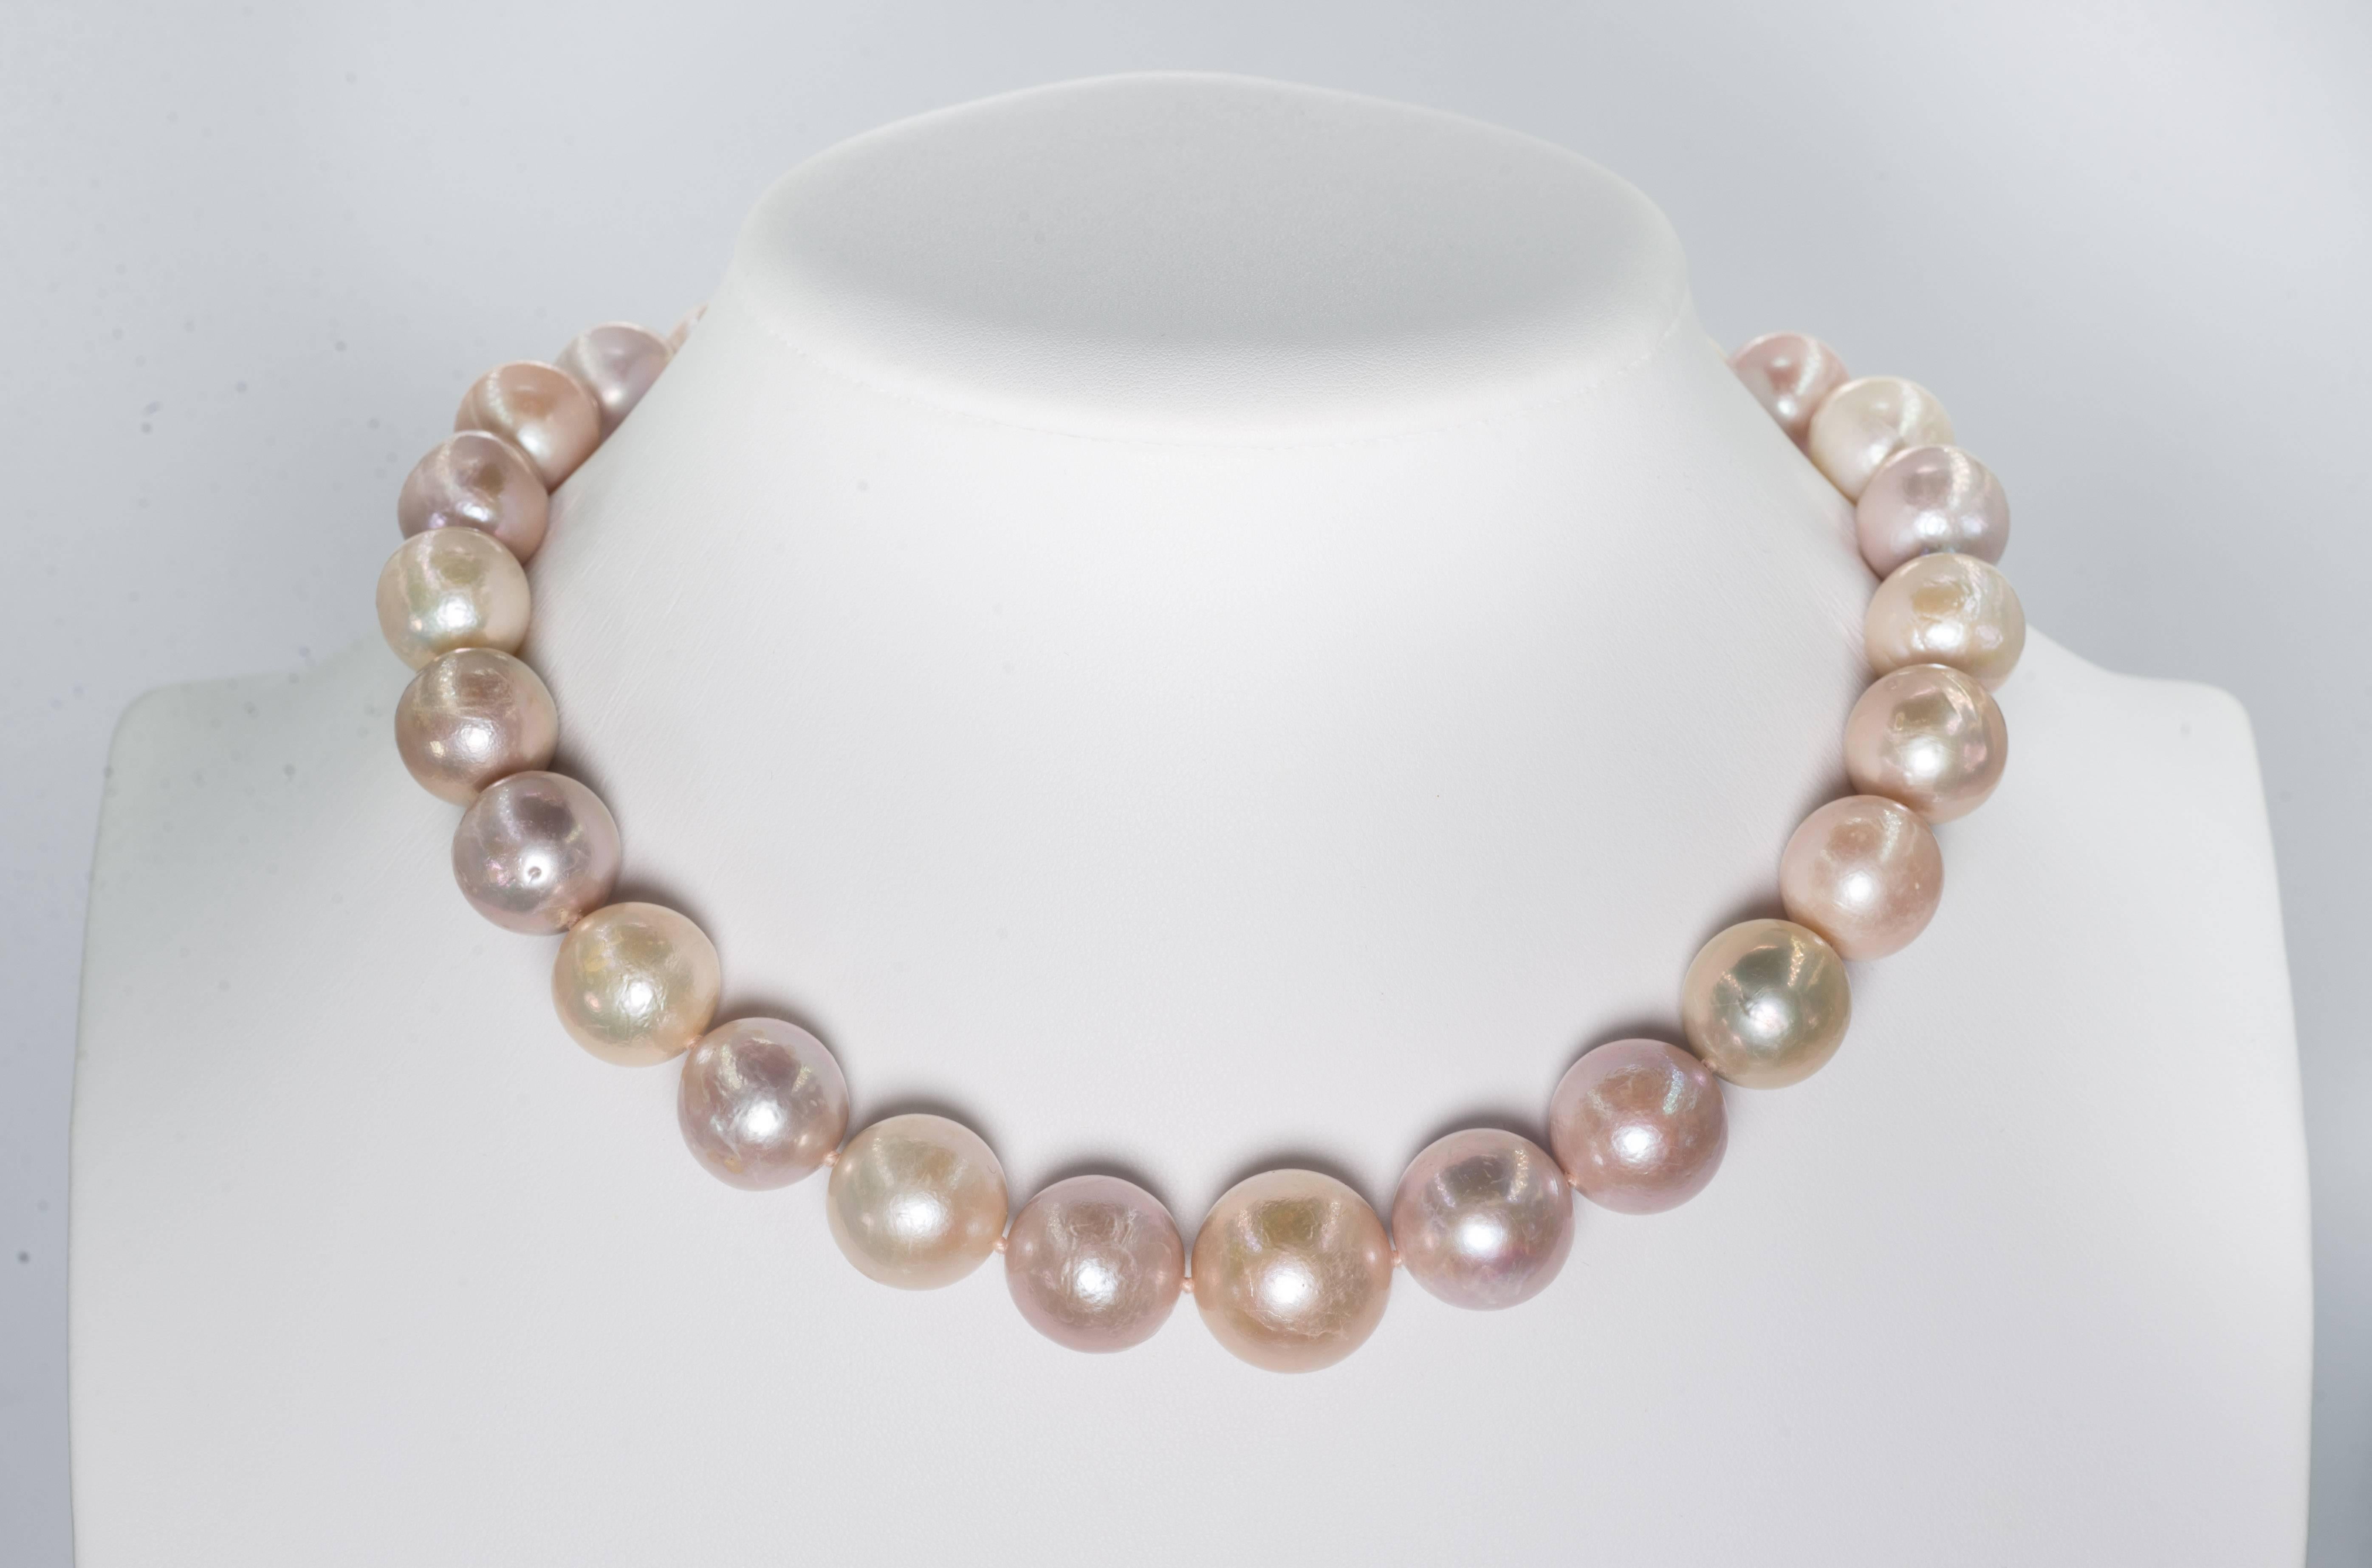 A wonderful high luster Argent Rose cultured natural water slightly baroque large pearl necklace slightly graduated, 16mm to 15mm, most pearls on the larger size, attached to a 14 karat gold invisible clasp. The necklace is 18 inches long.